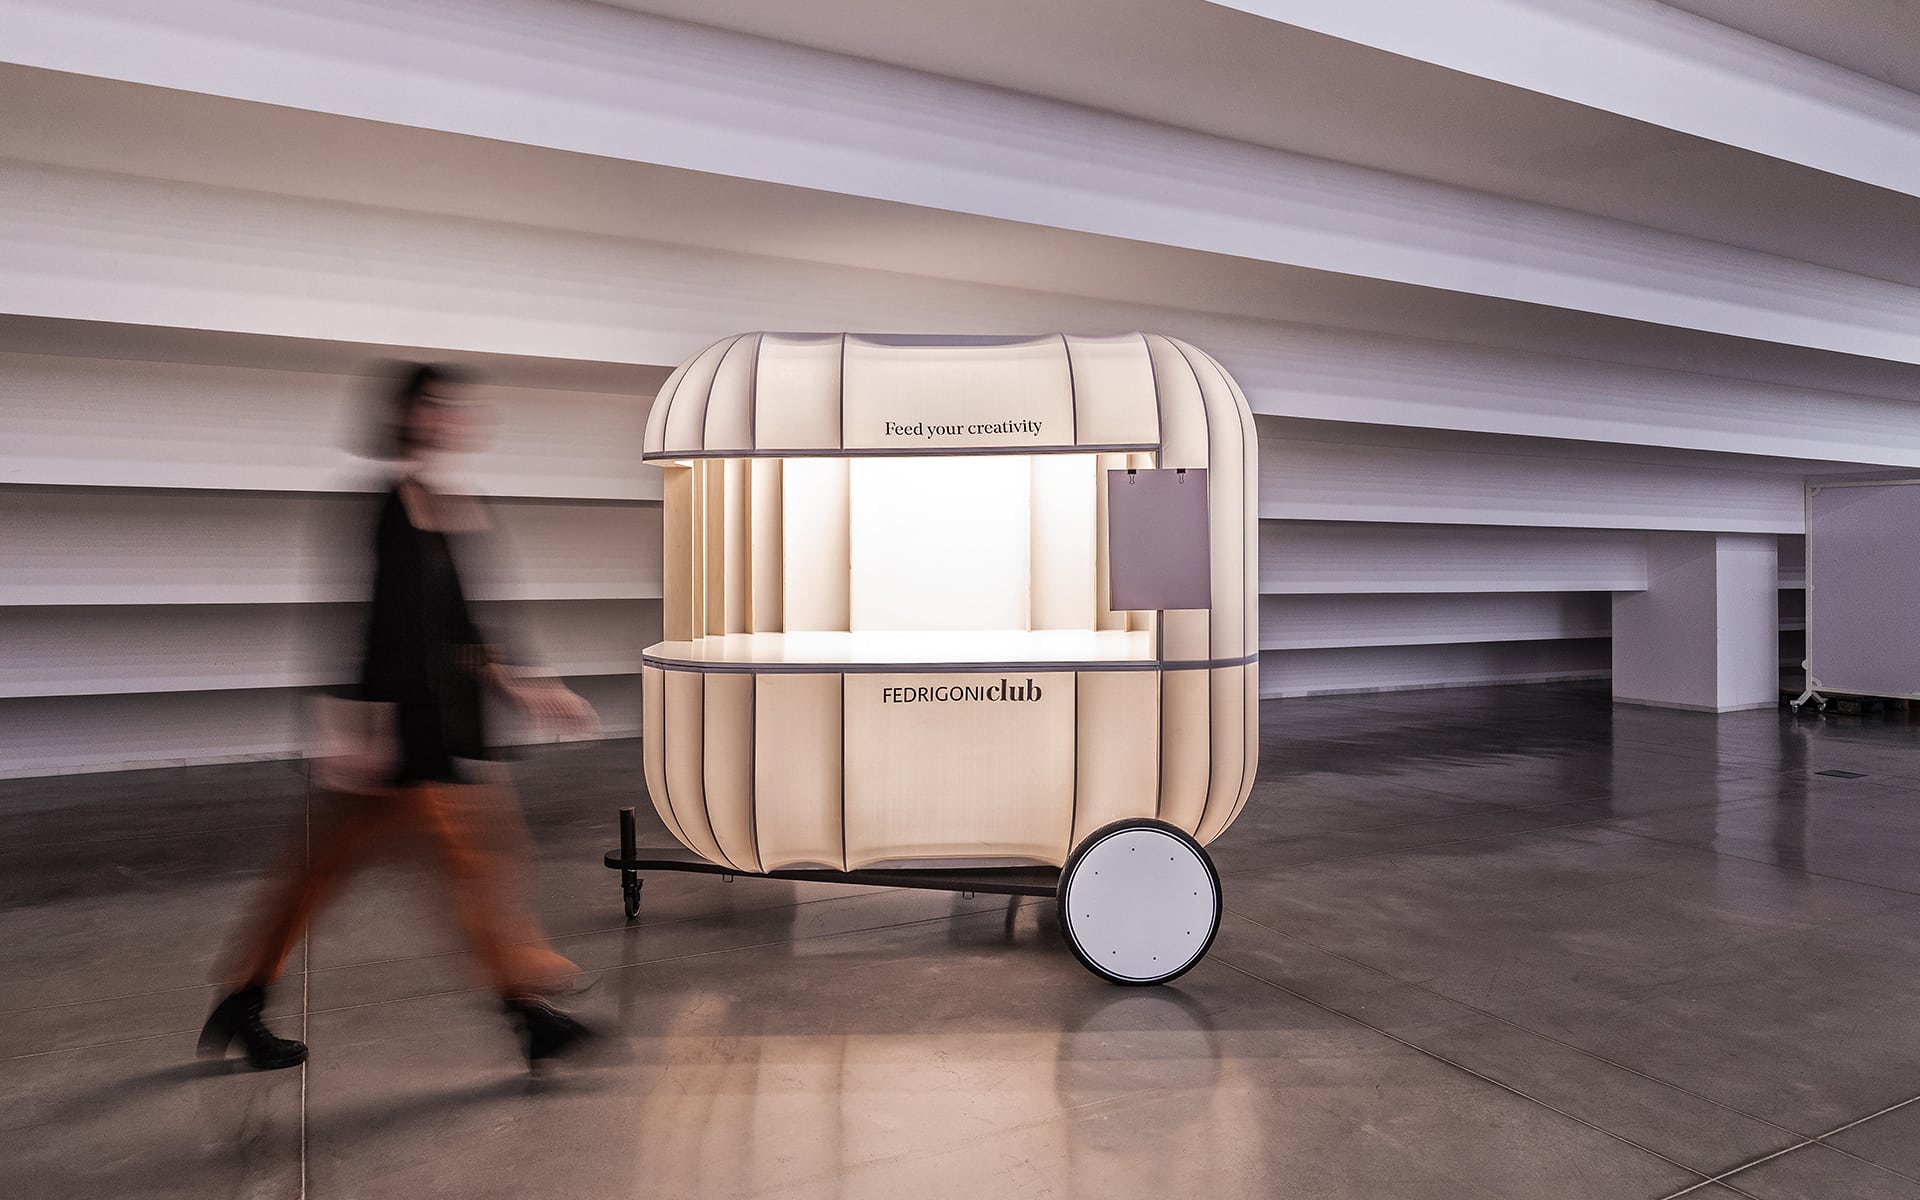 Fedrigoni's Paper Truck is a Promotional corner inspired on a food-truck